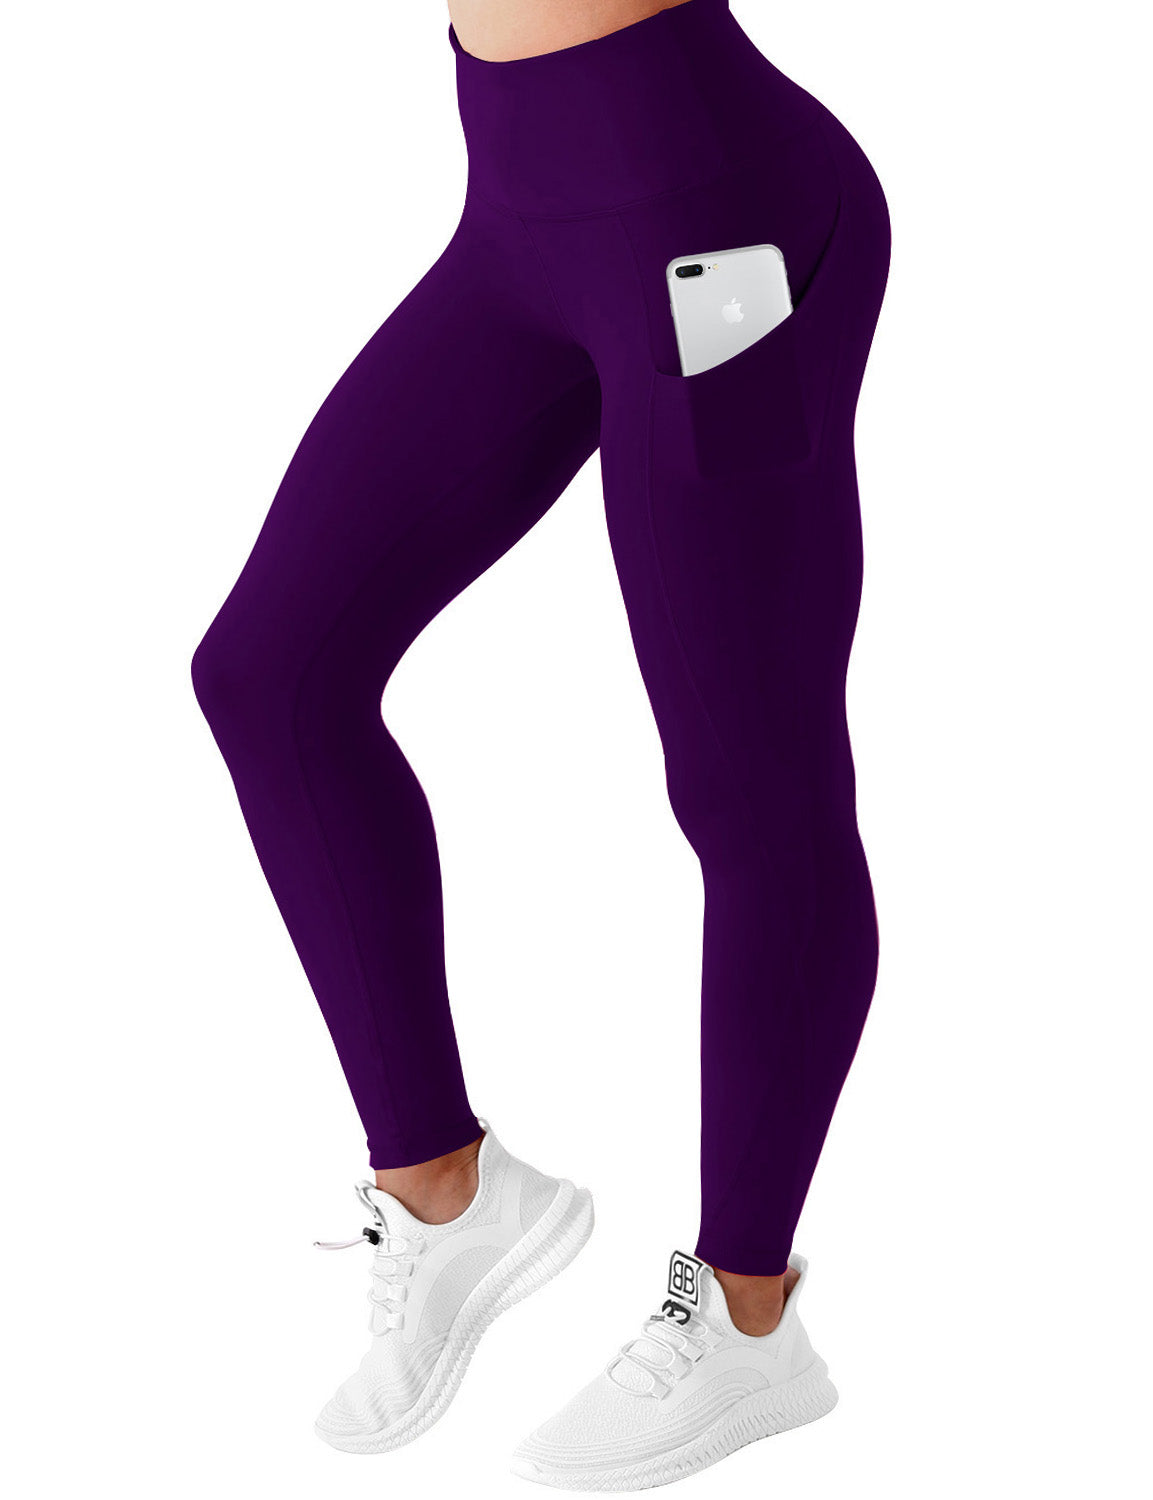 High Waist Side Pockets Running Pants eggplantpurple 75% Nylon, 25% Spandex Fabric doesn't attract lint easily 4-way stretch No see-through Moisture-wicking Tummy control Inner pocket